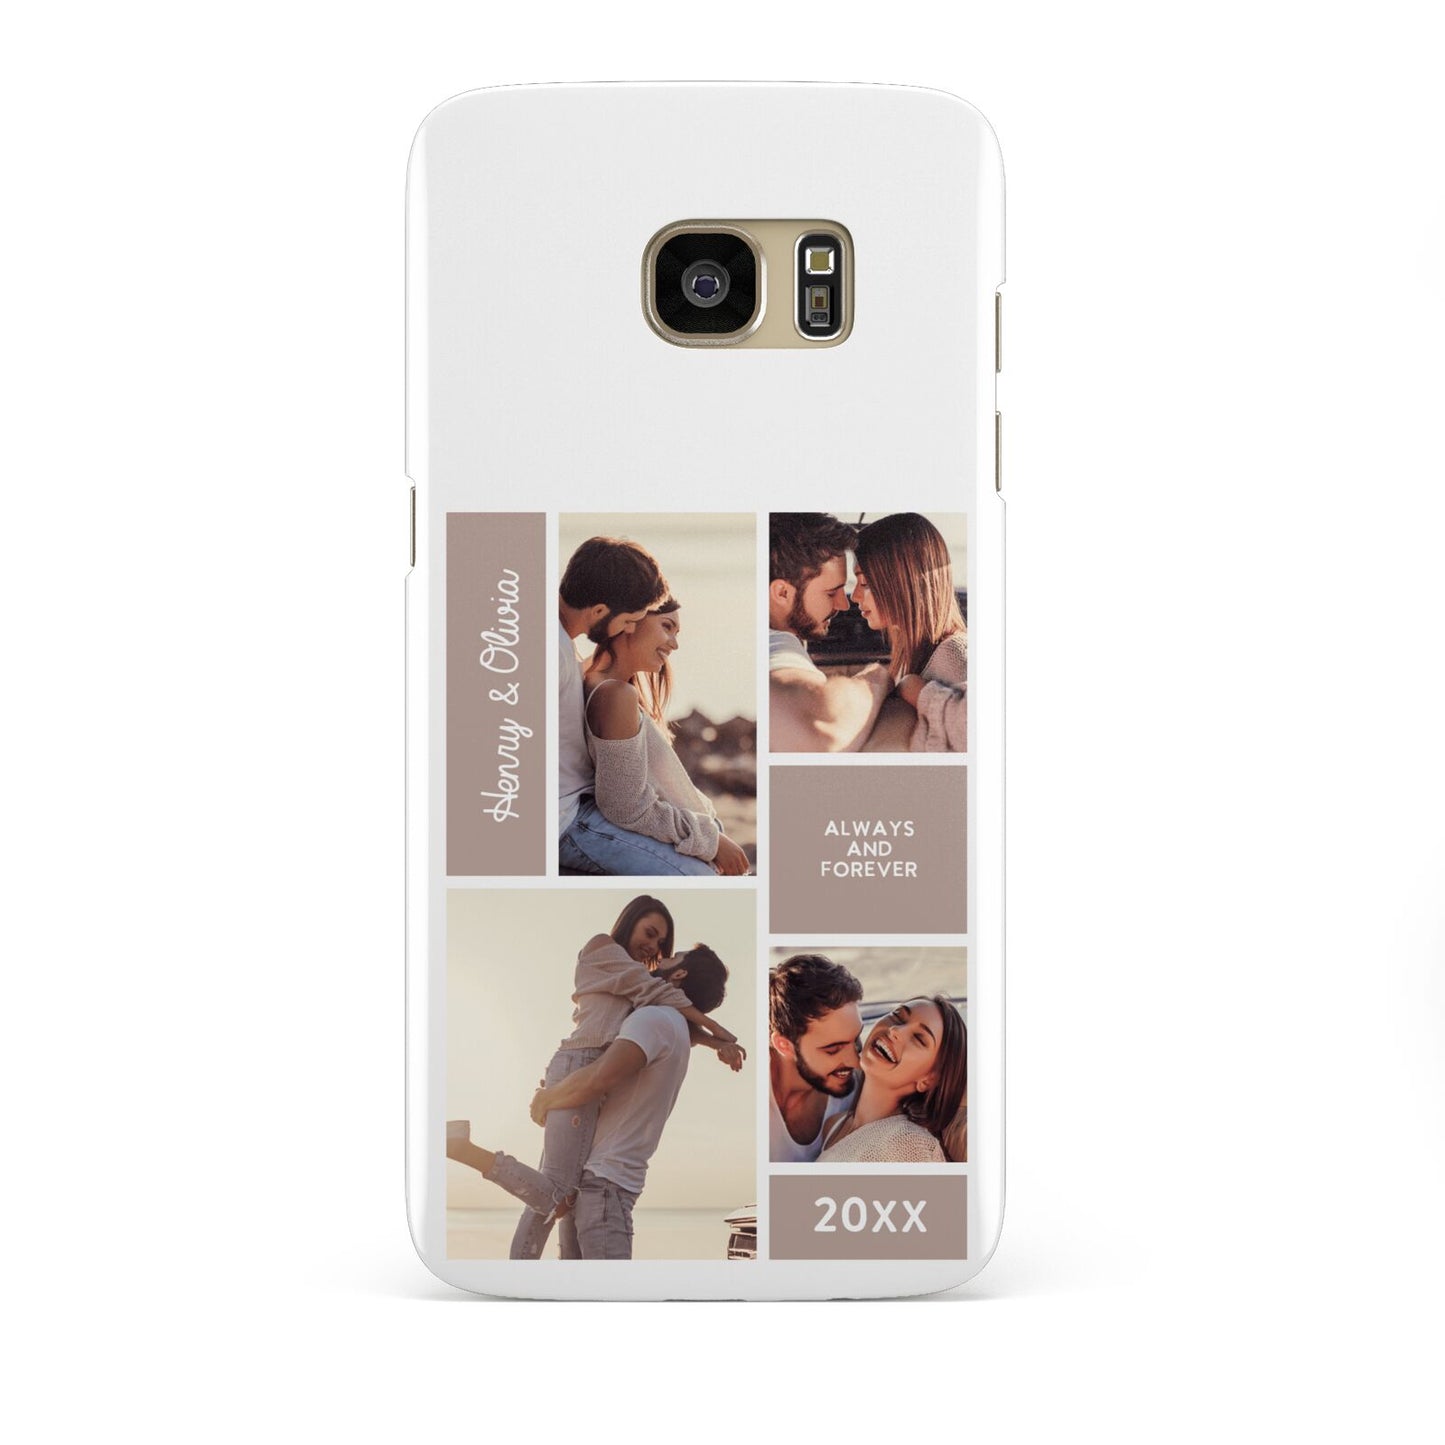 Couples Valentine Photo Collage Personalised Samsung Galaxy S7 Edge Case